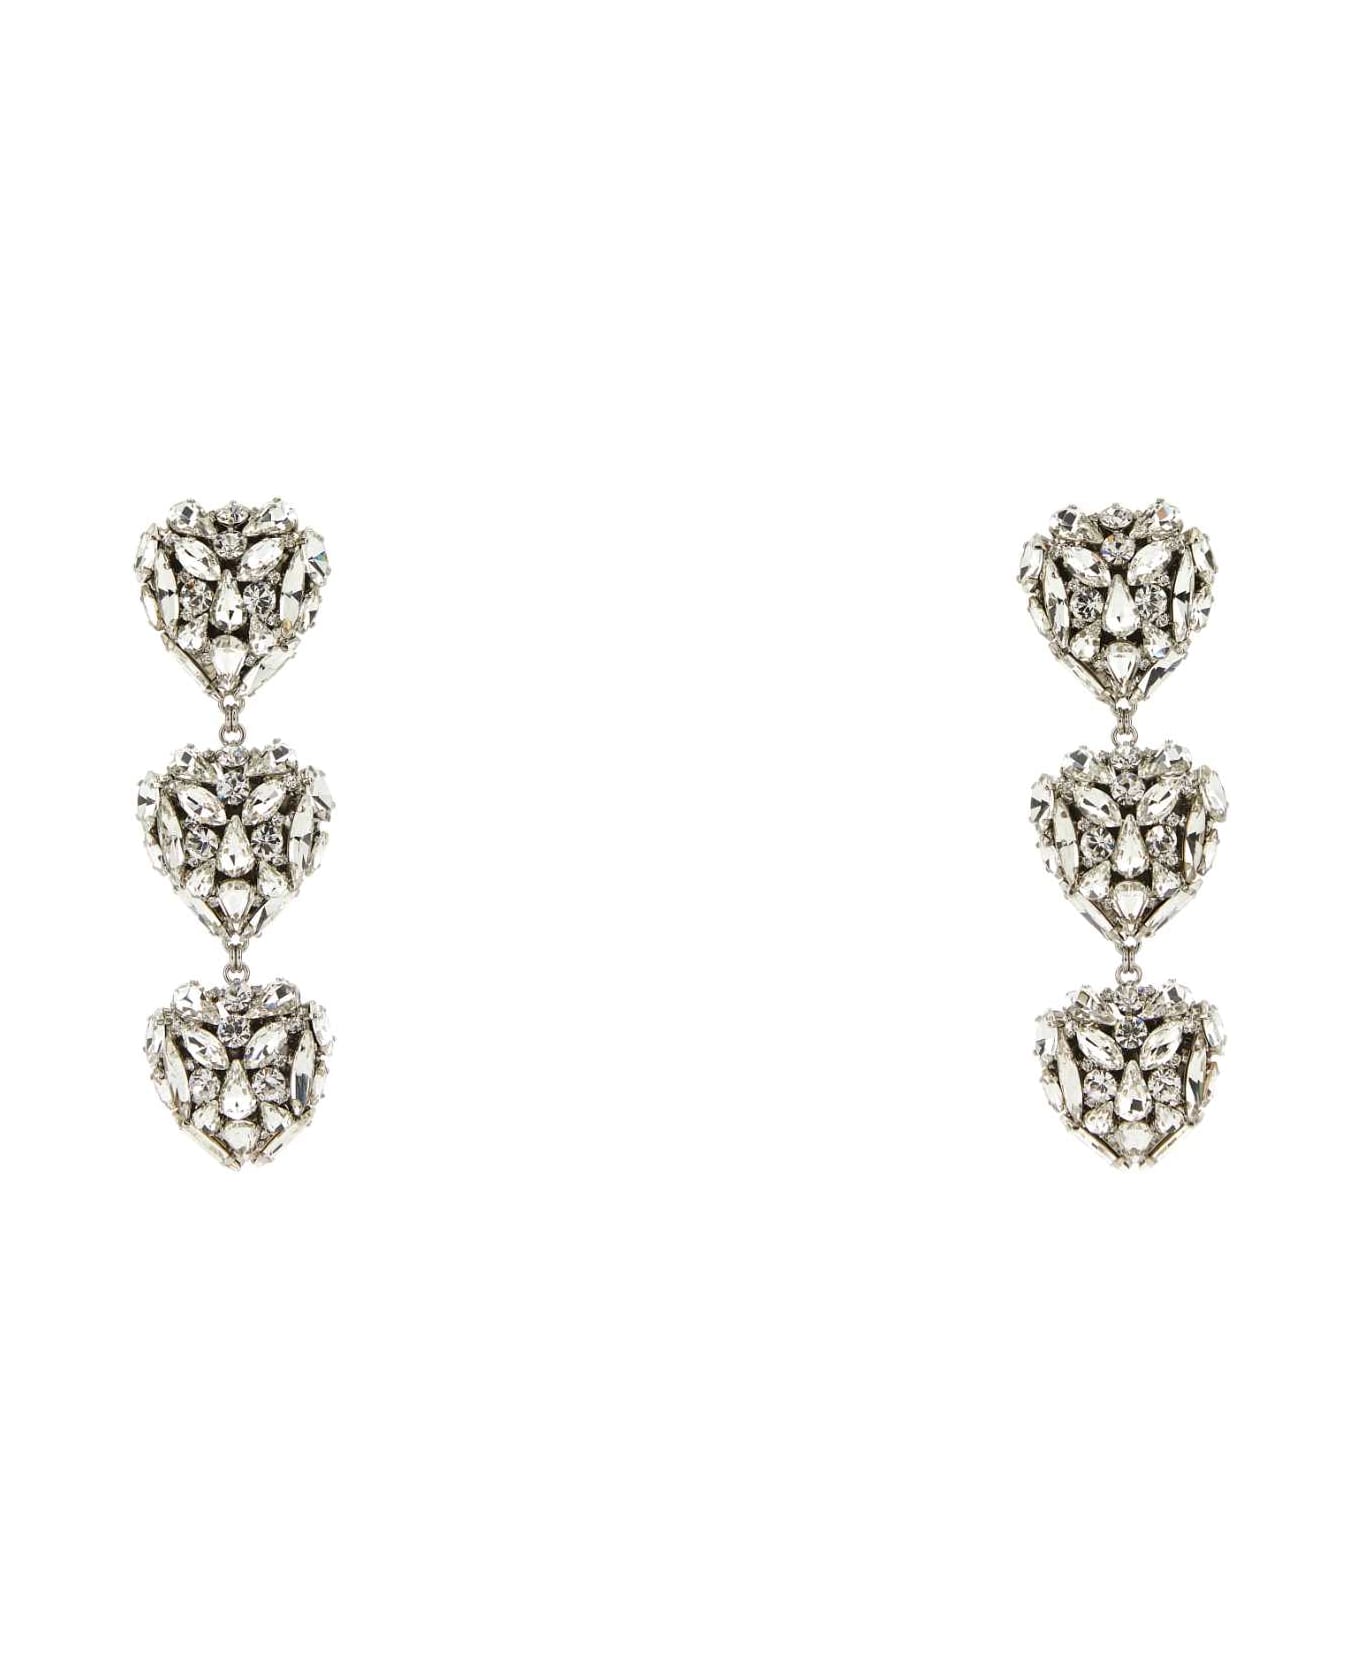 Alessandra Rich Embellished Metal Hearts Earrings - CRYSILVER